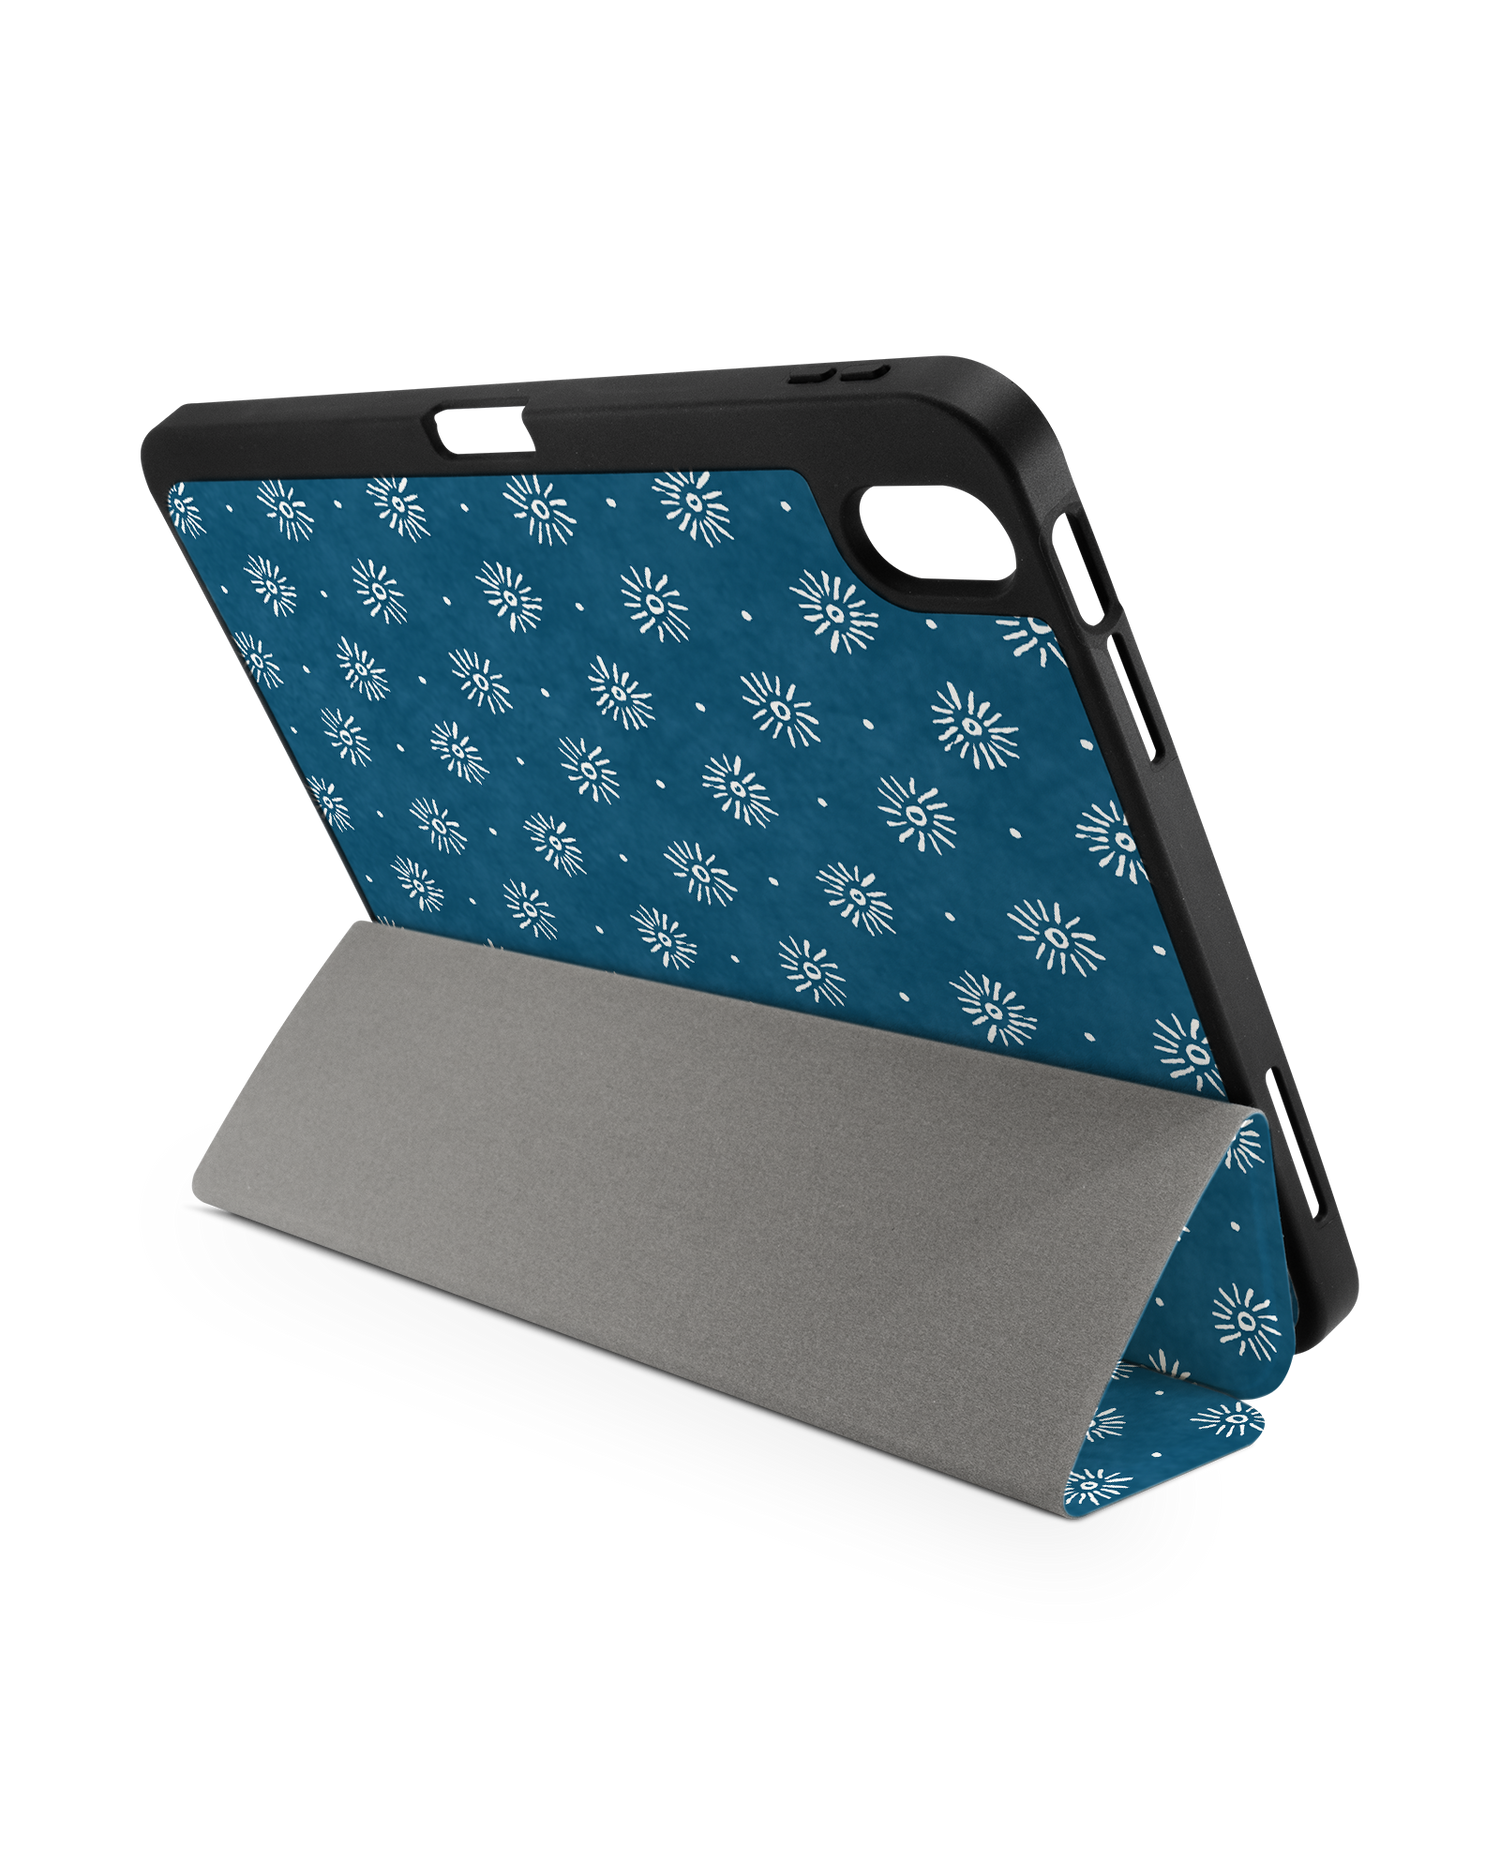 Indigo Sun Pattern iPad Case with Pencil Holder for Apple iPad (10th Generation): Set up in landscape format (back view)